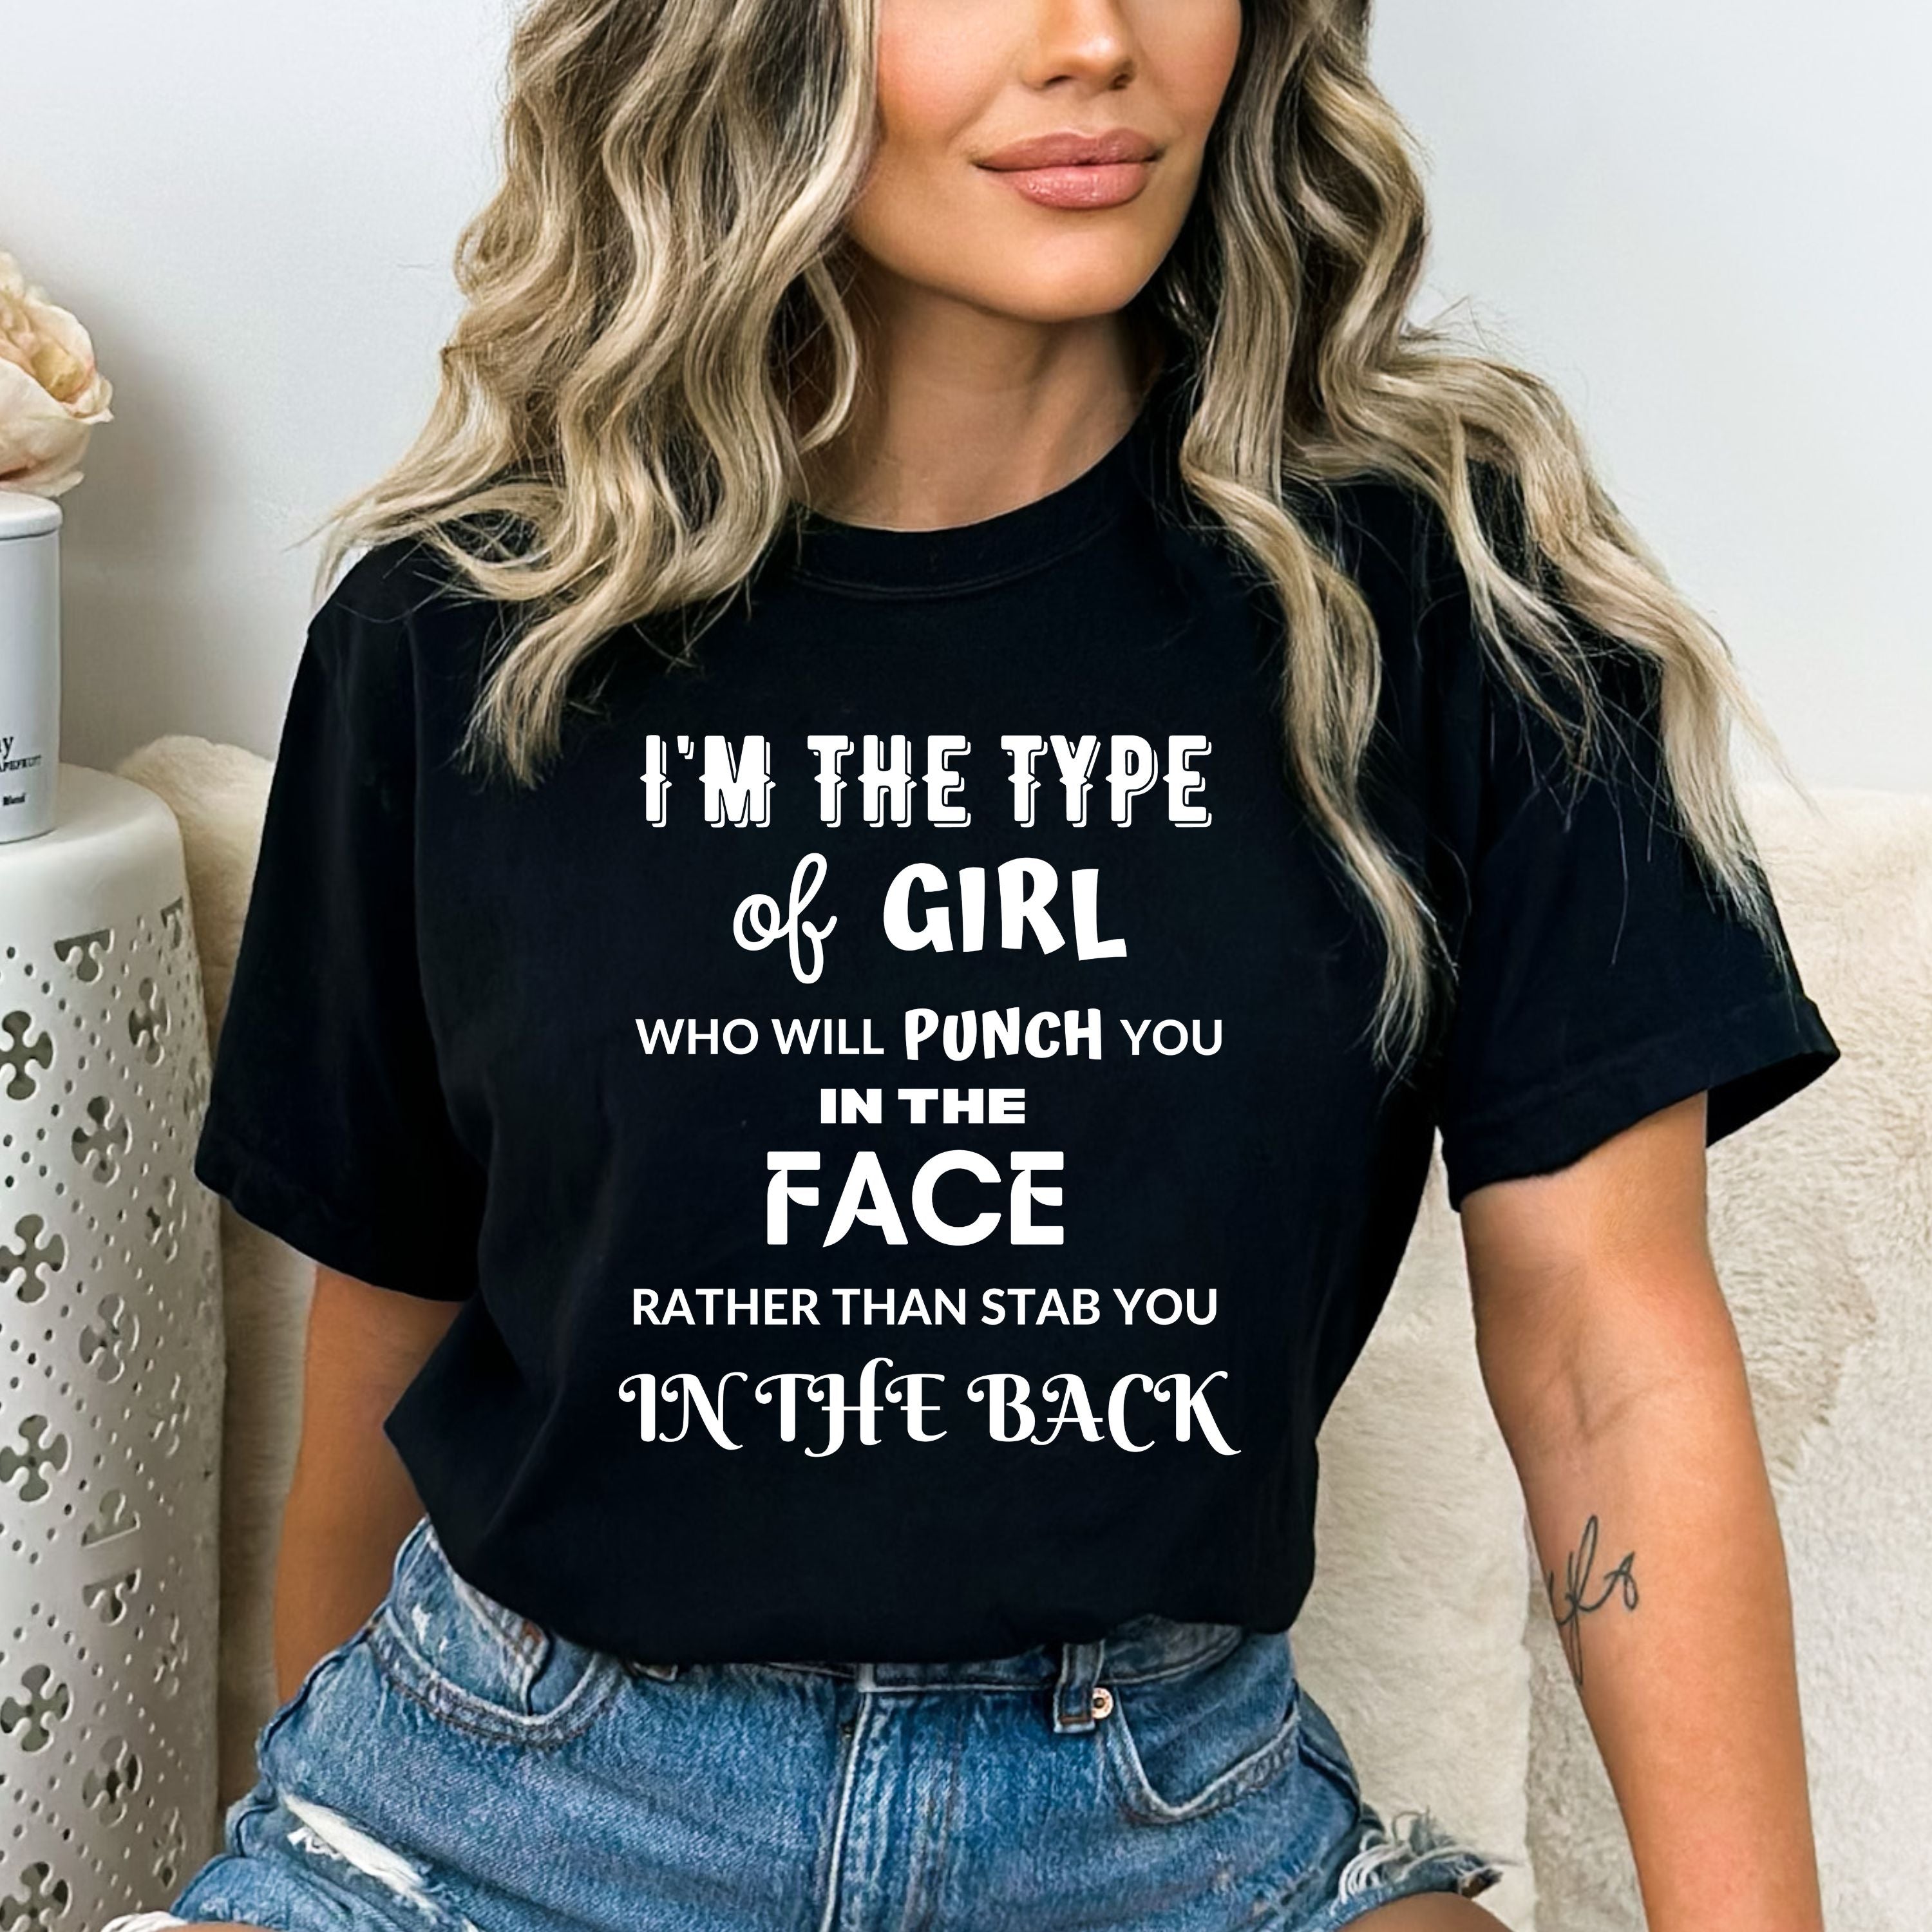 "I'M THE TYPE OF GIRL" T-Shirt.